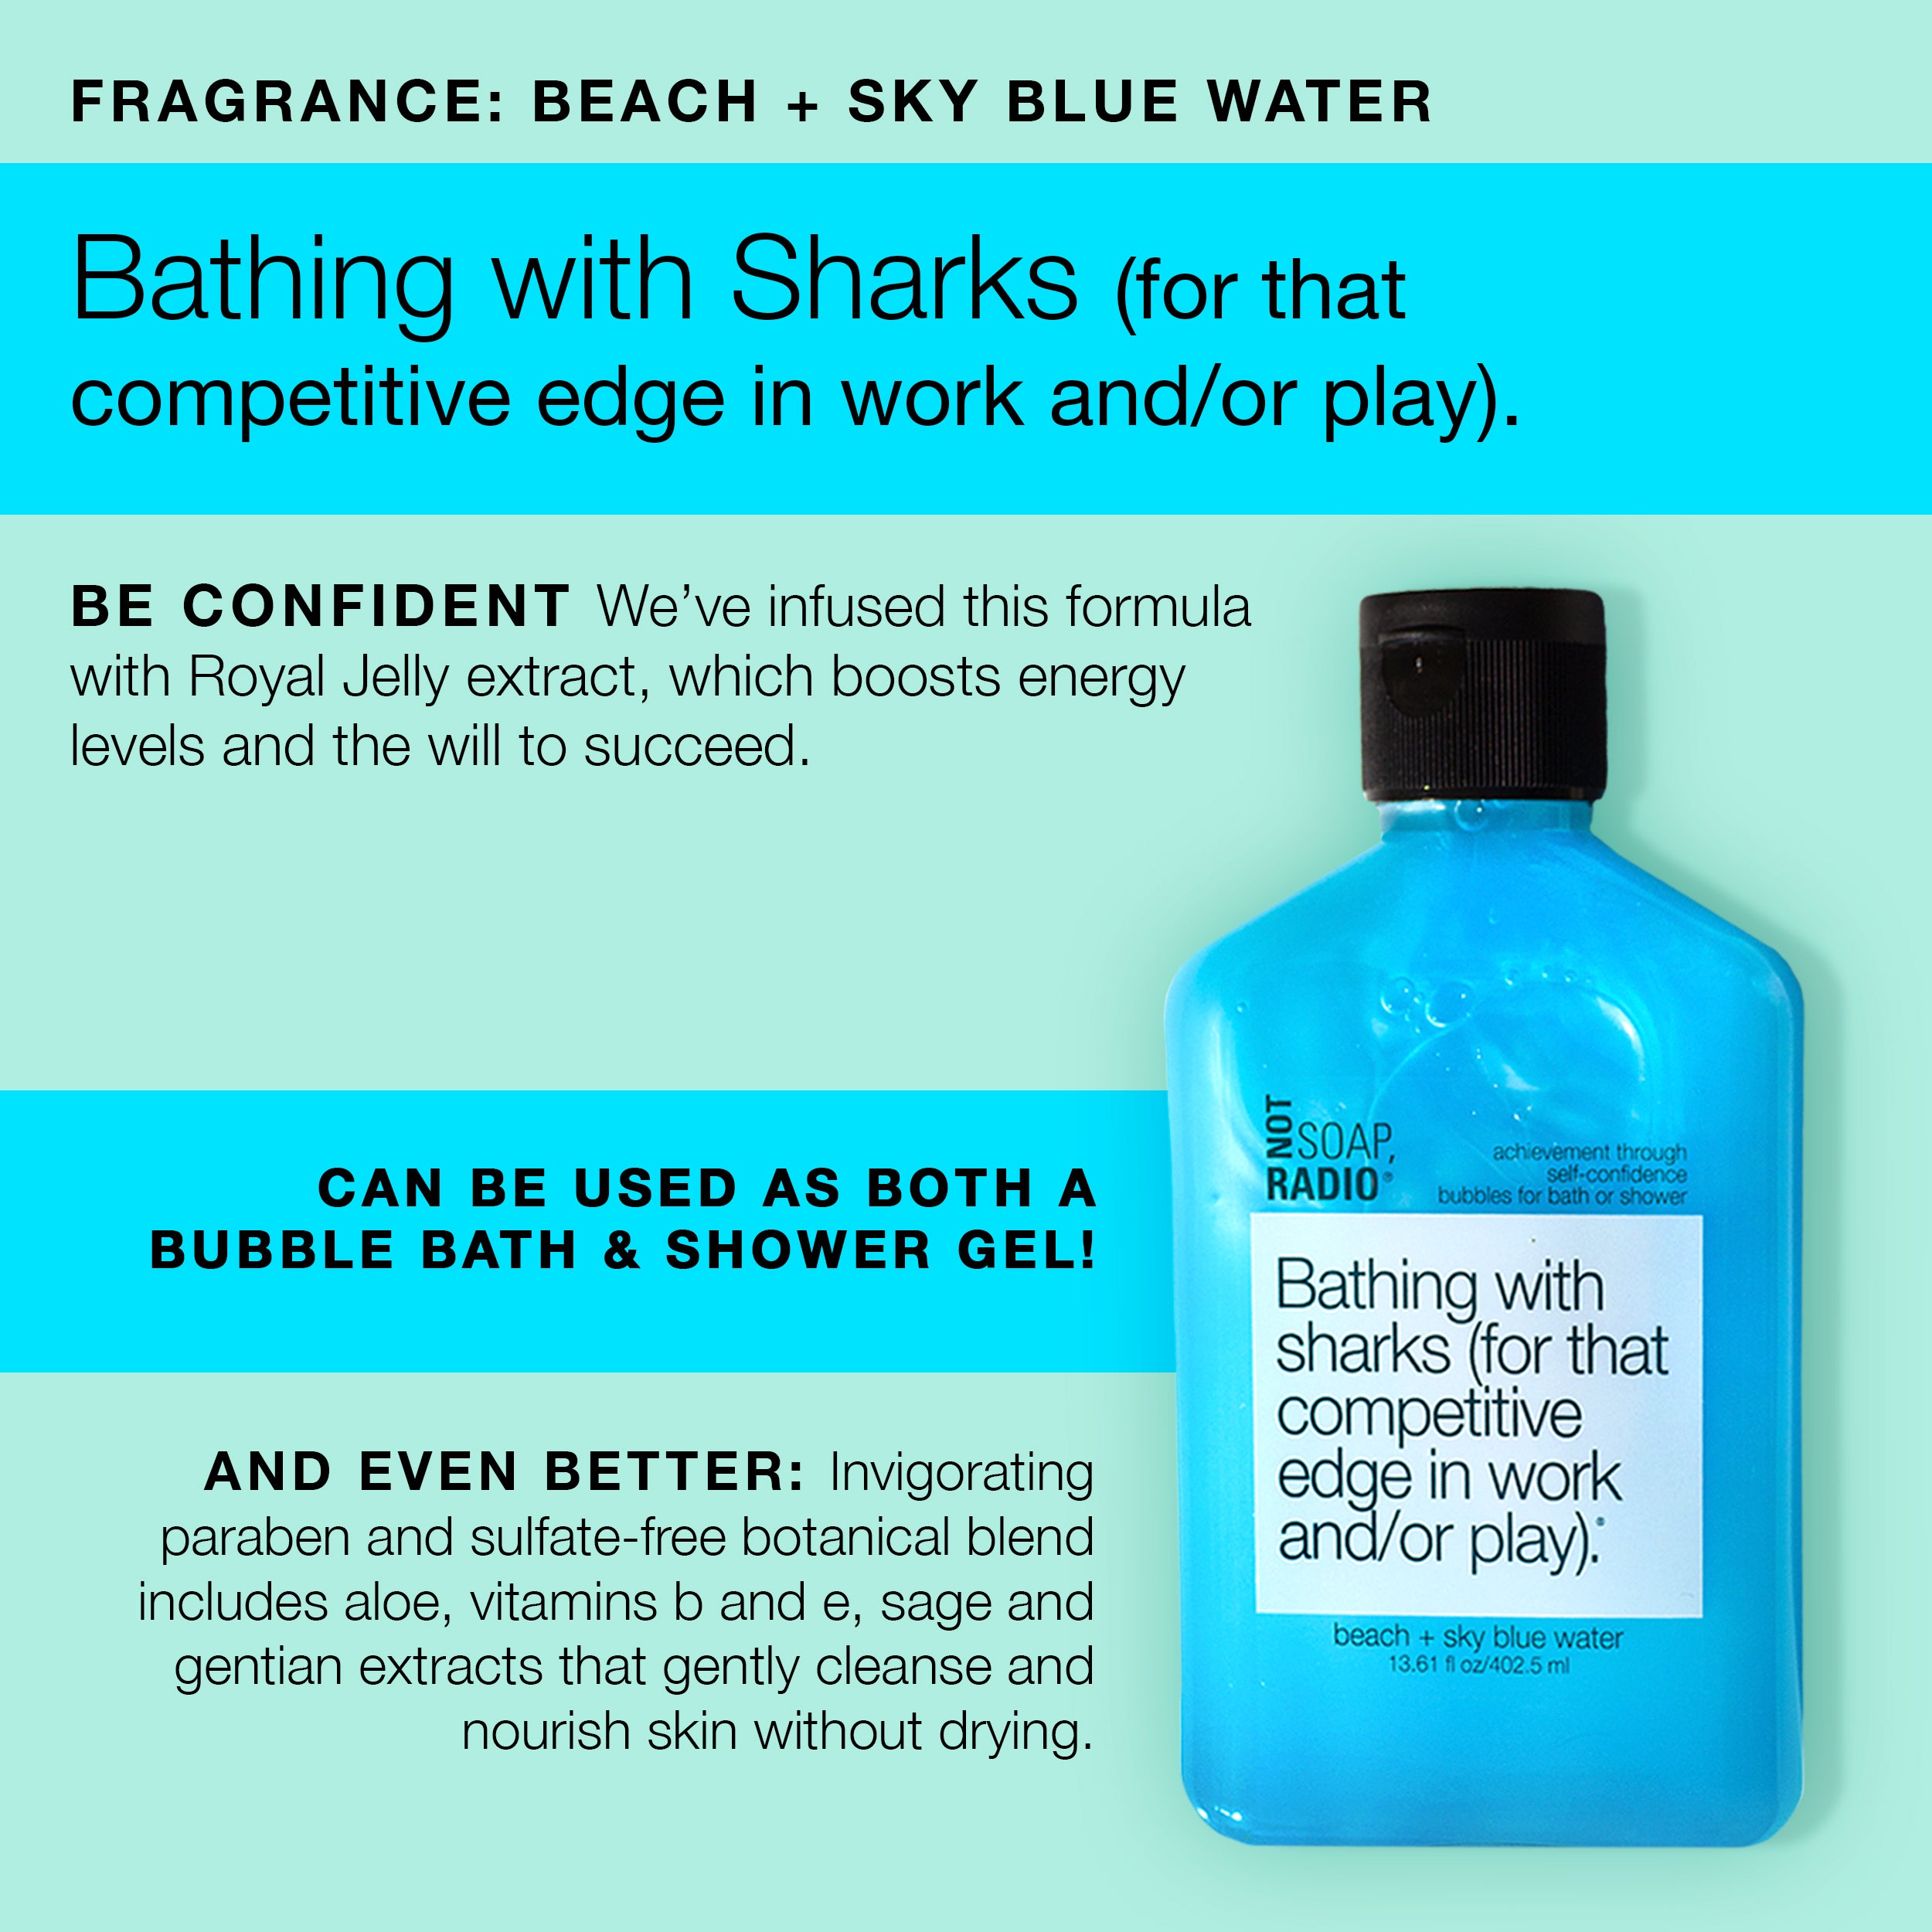 An infographic explaining the benefits and uses of the Not Soap Radio blue shower gel.